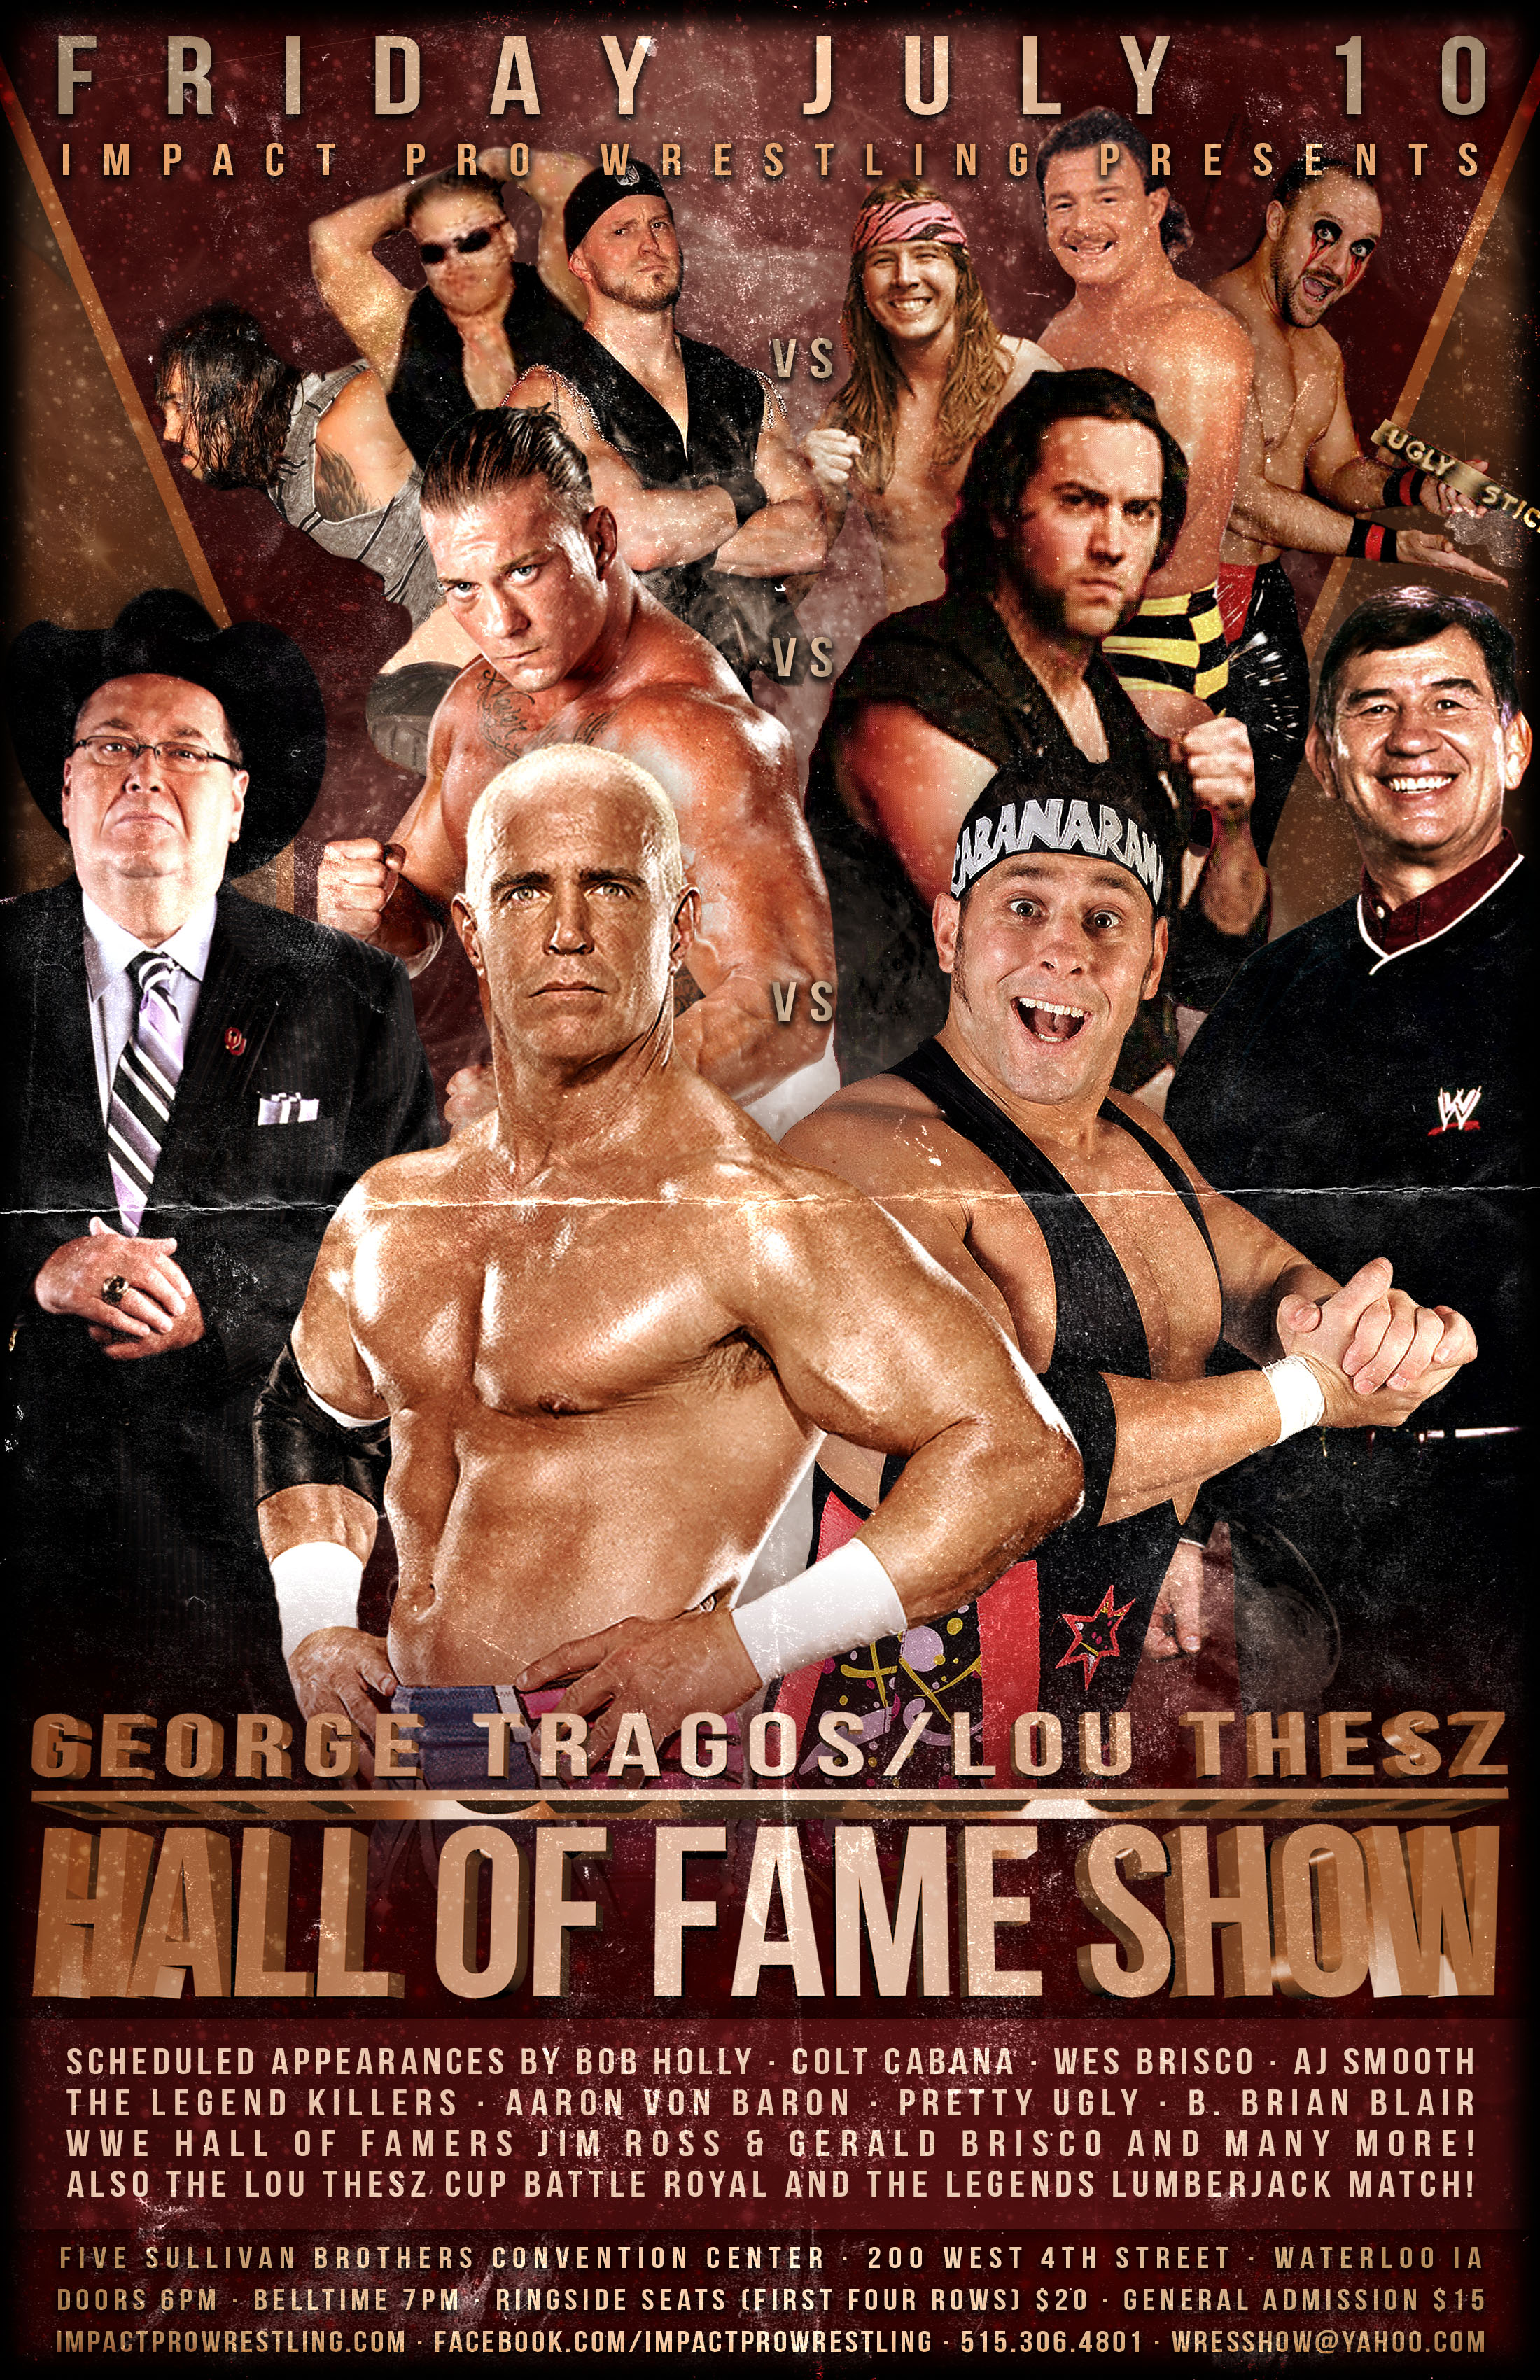 HOF NEWS Top matches announced for Tragos/Thesz Hall of